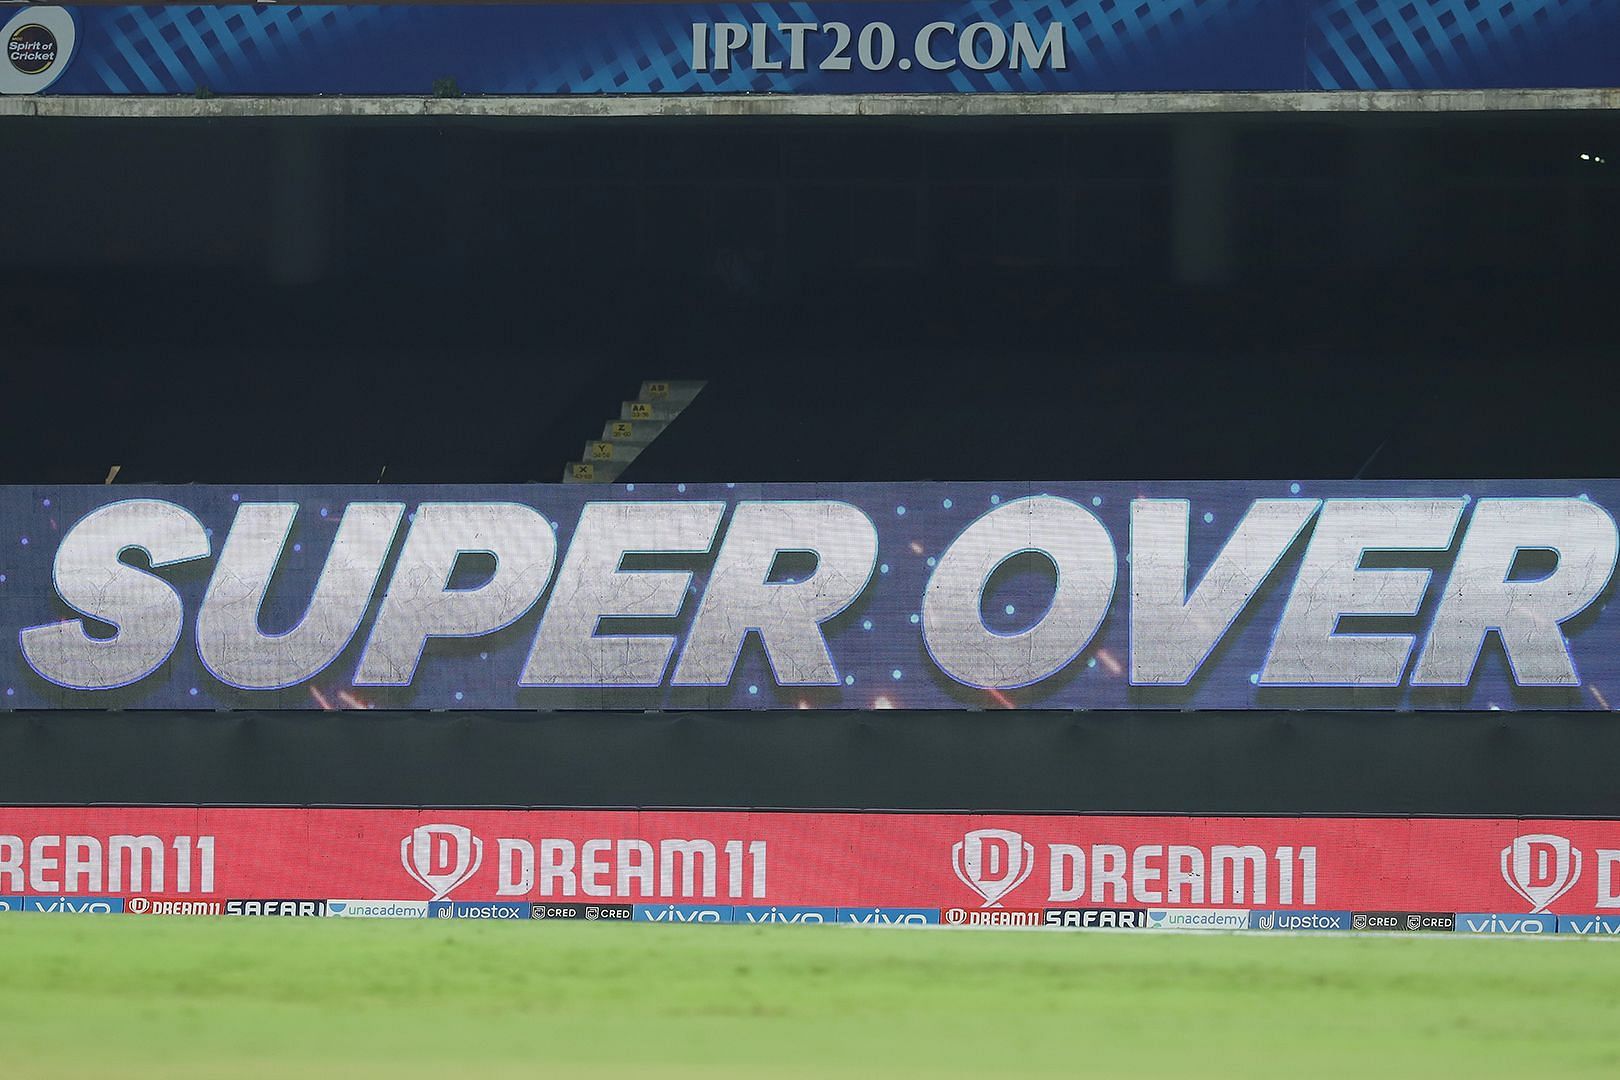 A Super Over helps in deciding the winner of the tied matches in Indian Premier League (Image Courtesy: IPLT20.com)